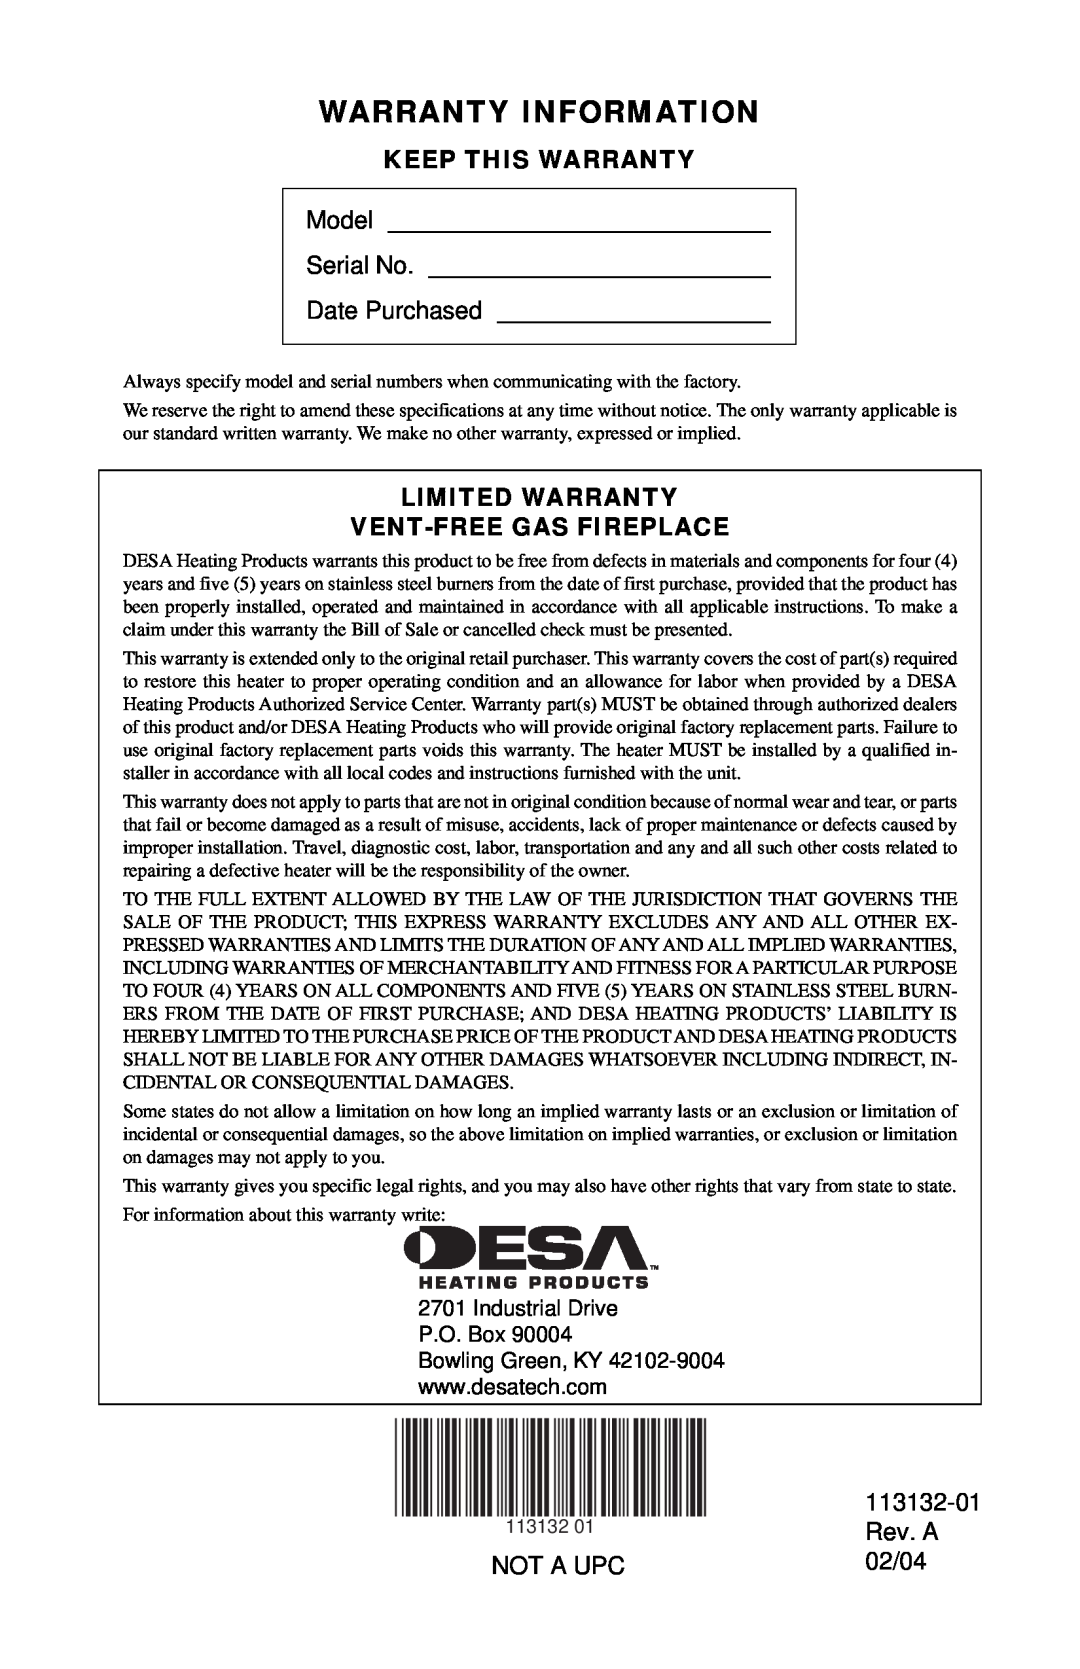 Desa EFS33NRB Keep This Warranty, Model, Serial No, Date Purchased, Limited Warranty Vent-Freegas Fireplace, 113132-01 